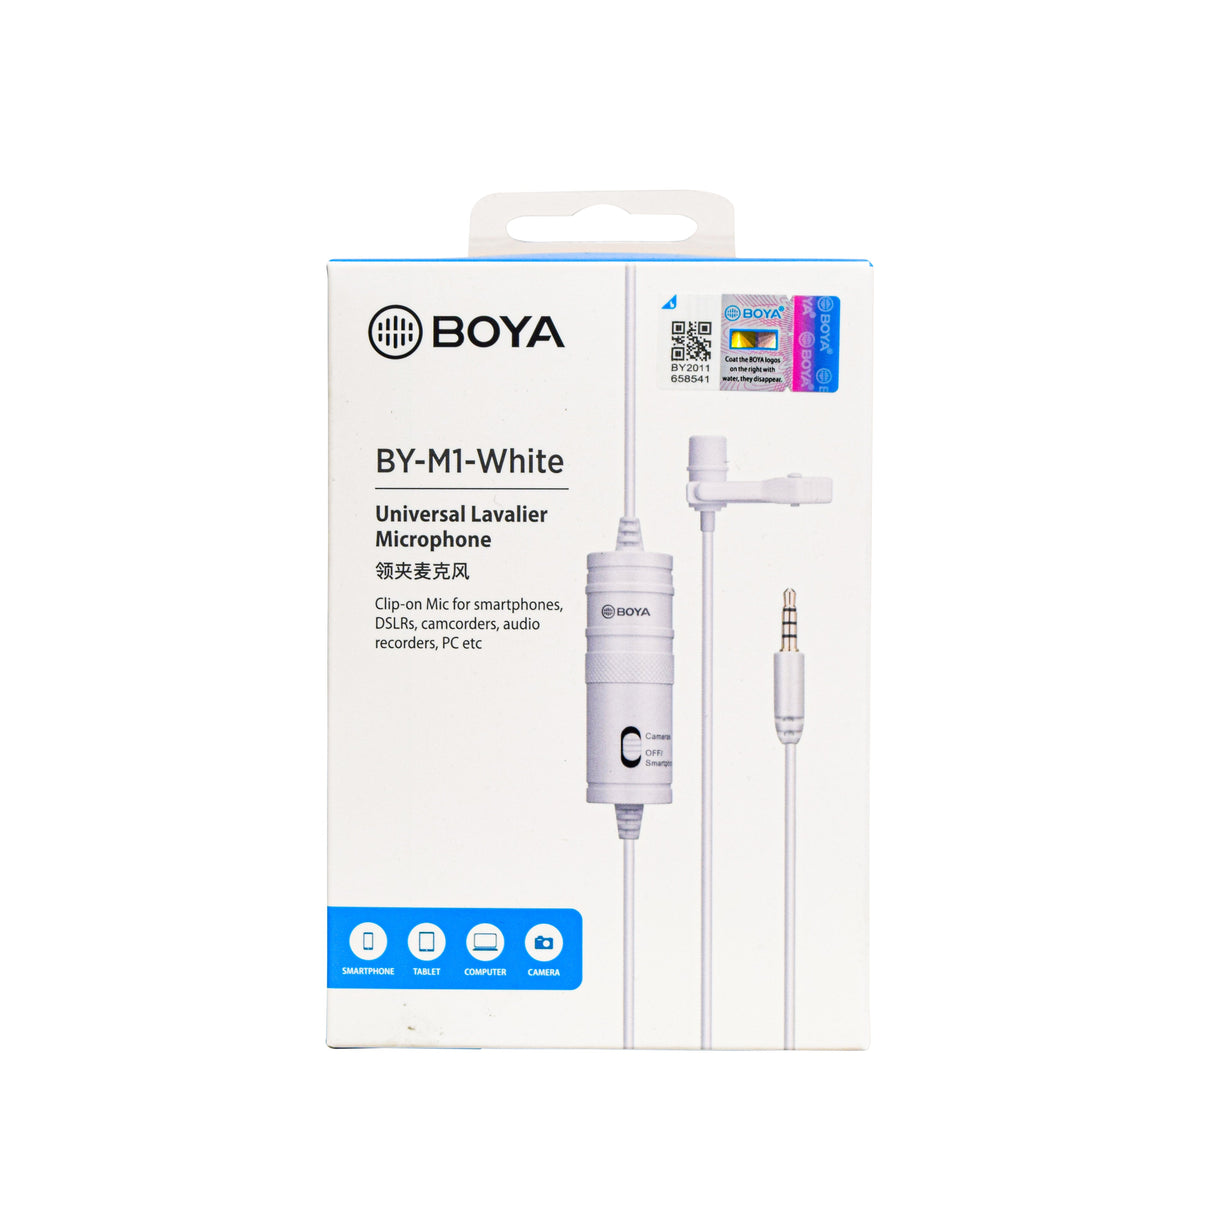 BOYA BY-M1 white with Mount3 Omnidirectional Lavalier Condenser Microphone